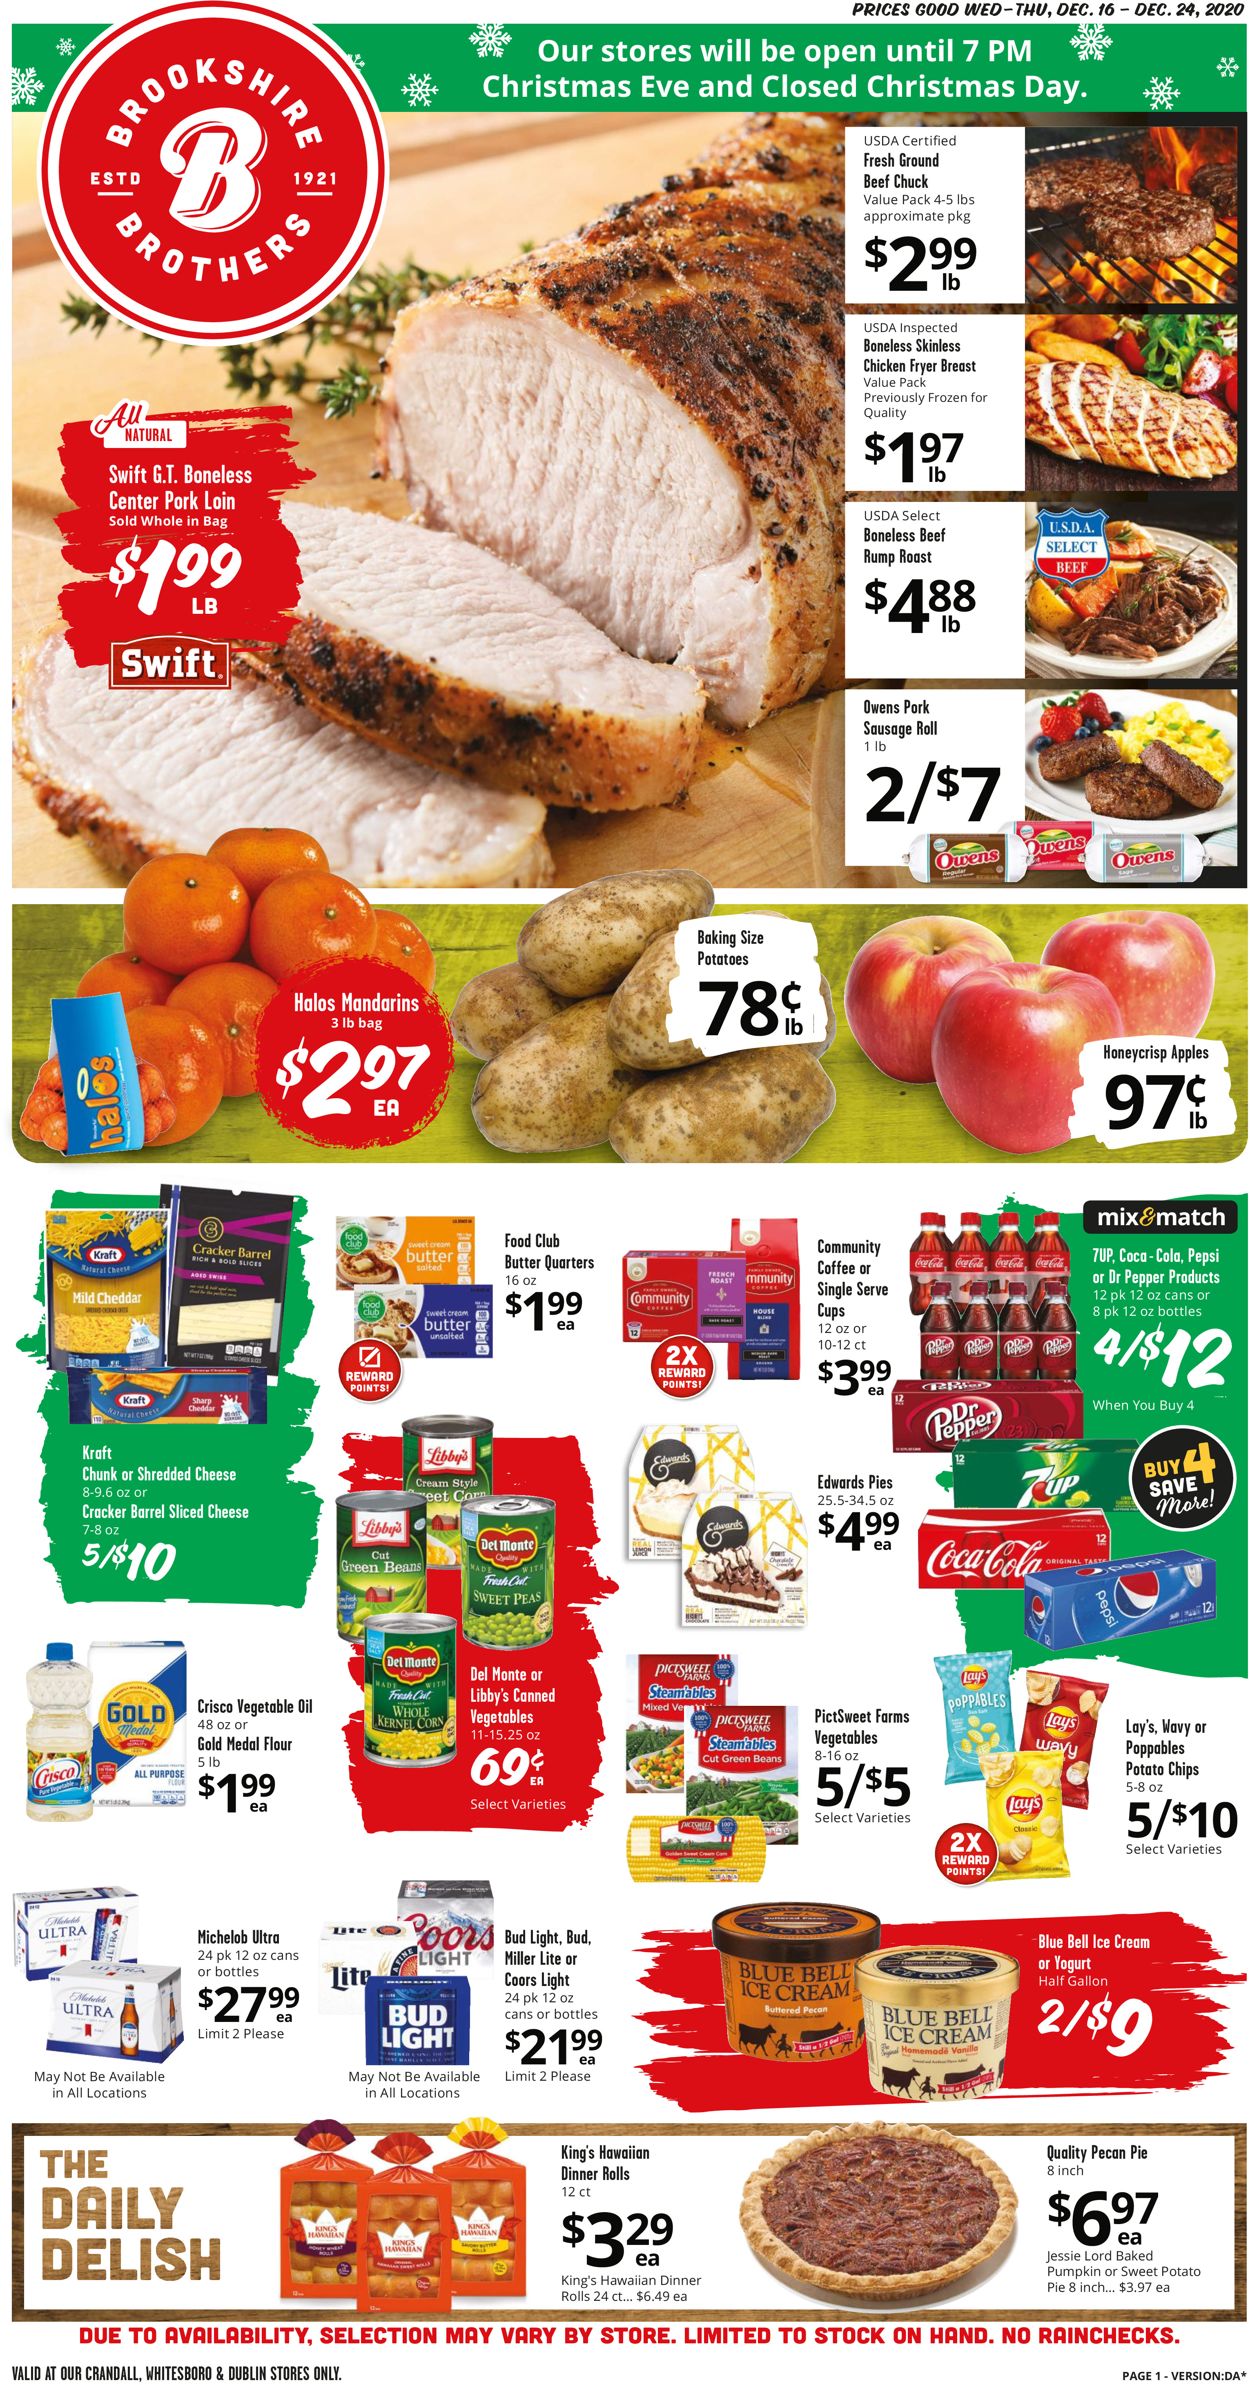 Brookshire Brothers Current weekly ad 12/16 12/24/2020